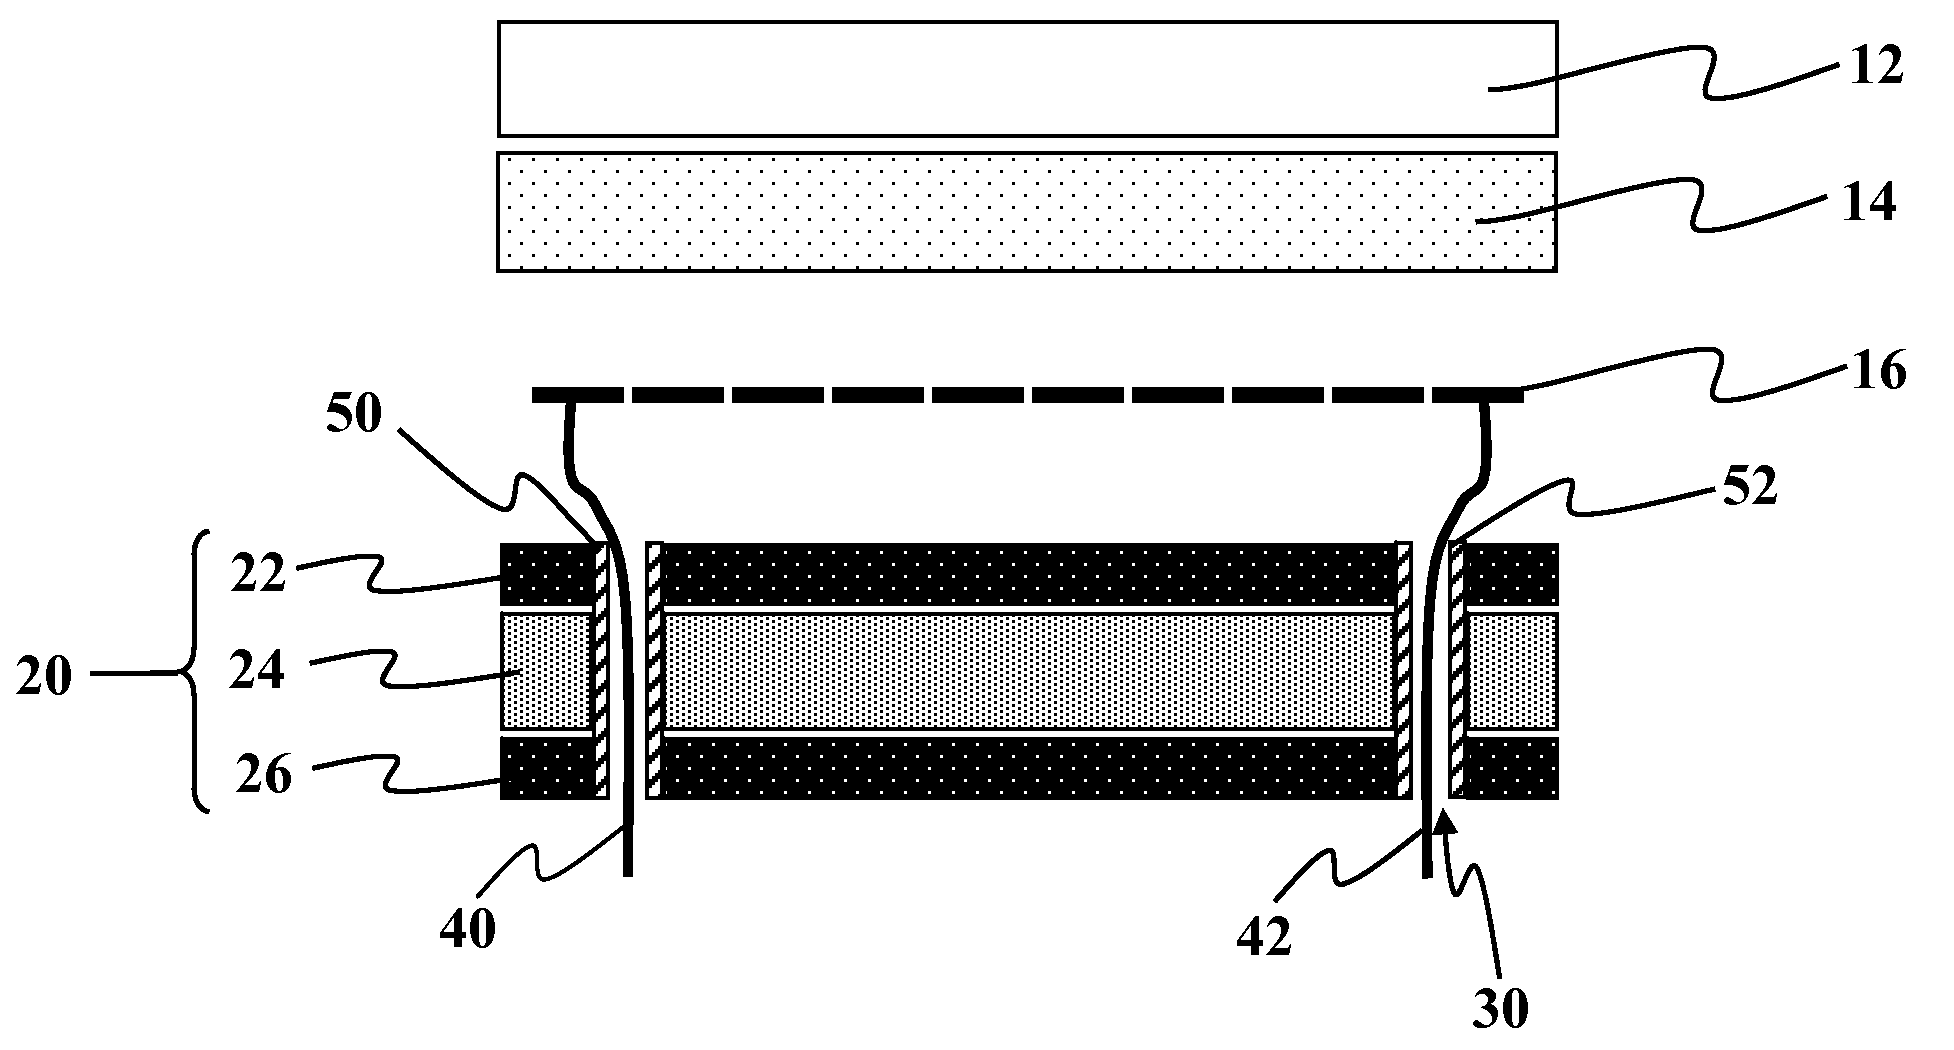 Methods and devices for large-scale solar installations